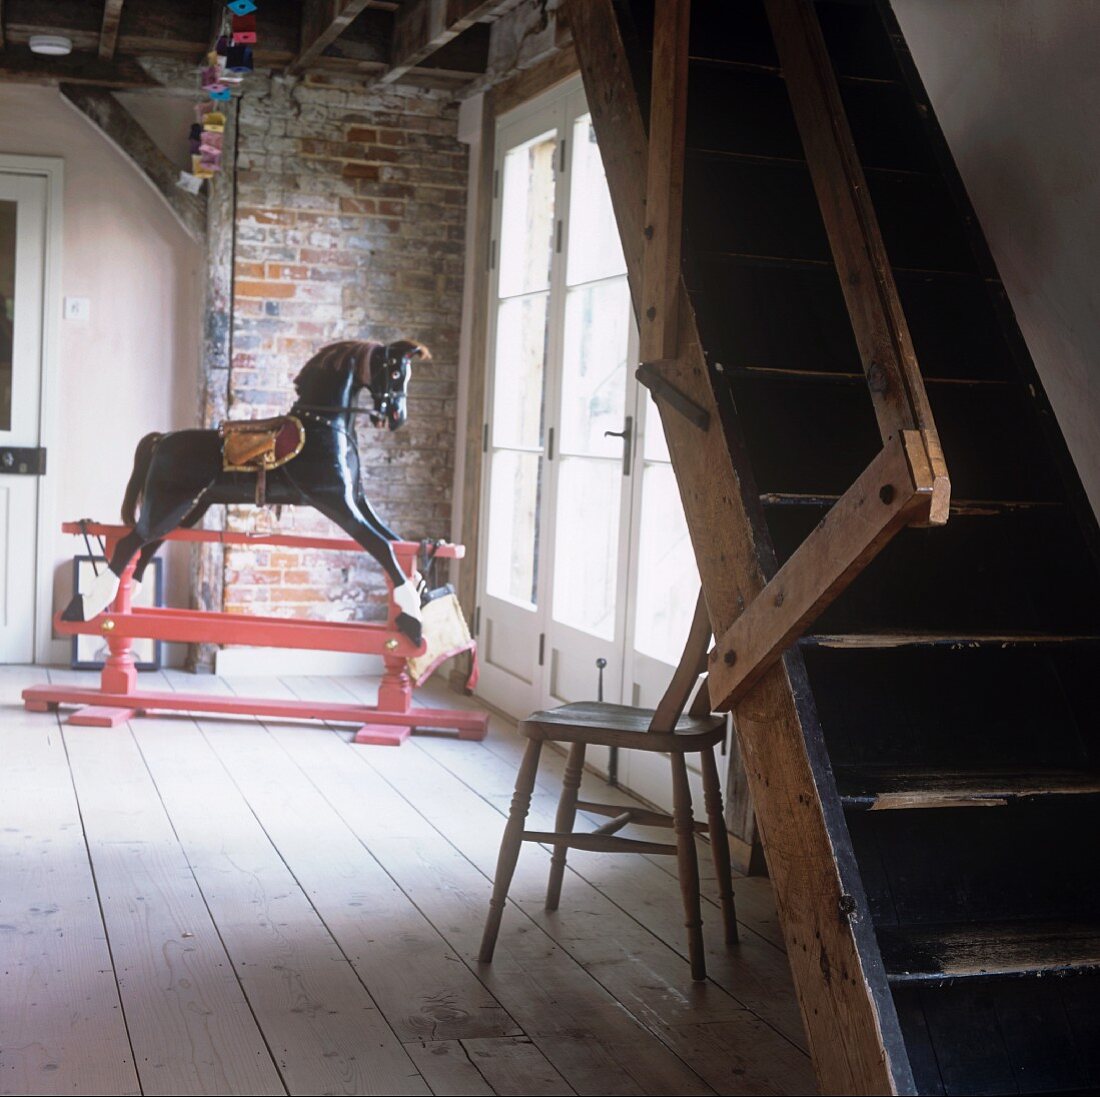 A rocking horse and a flight of wooden steps in an anteroom